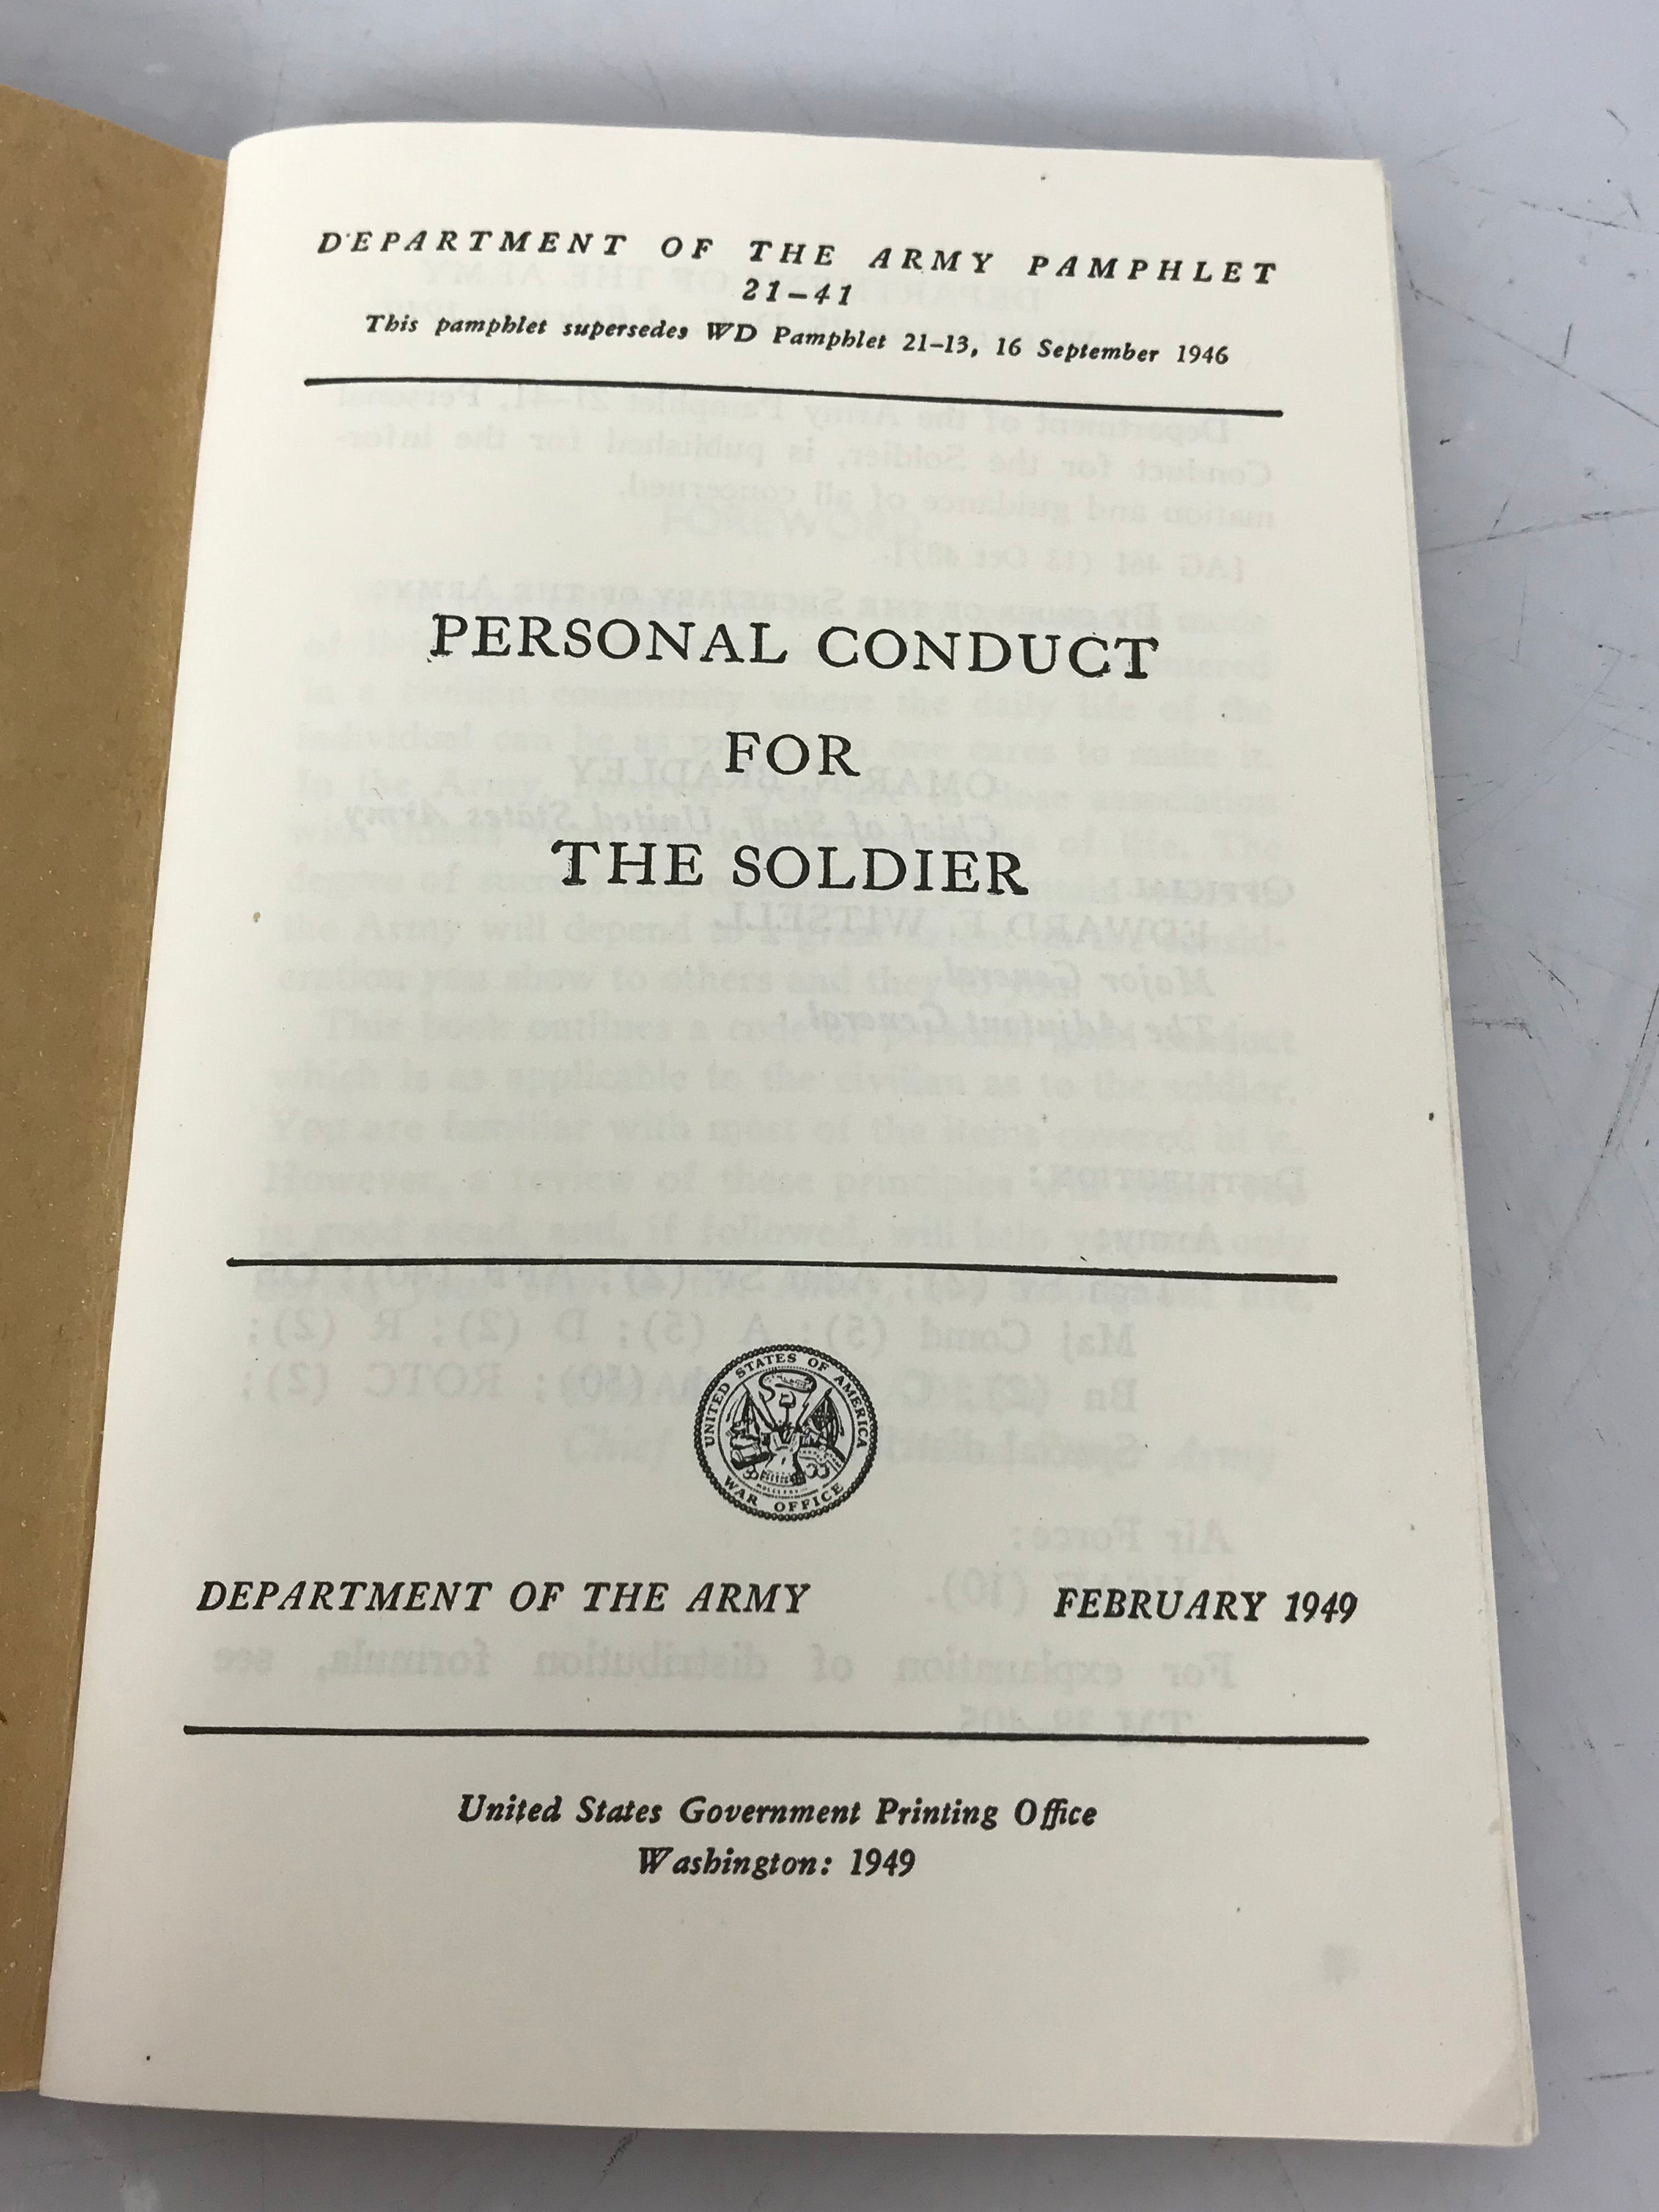 Army Field Manuals Lot of 2 The Soldier's Guide & Conduct FM 21-13 21-41 1949-1952